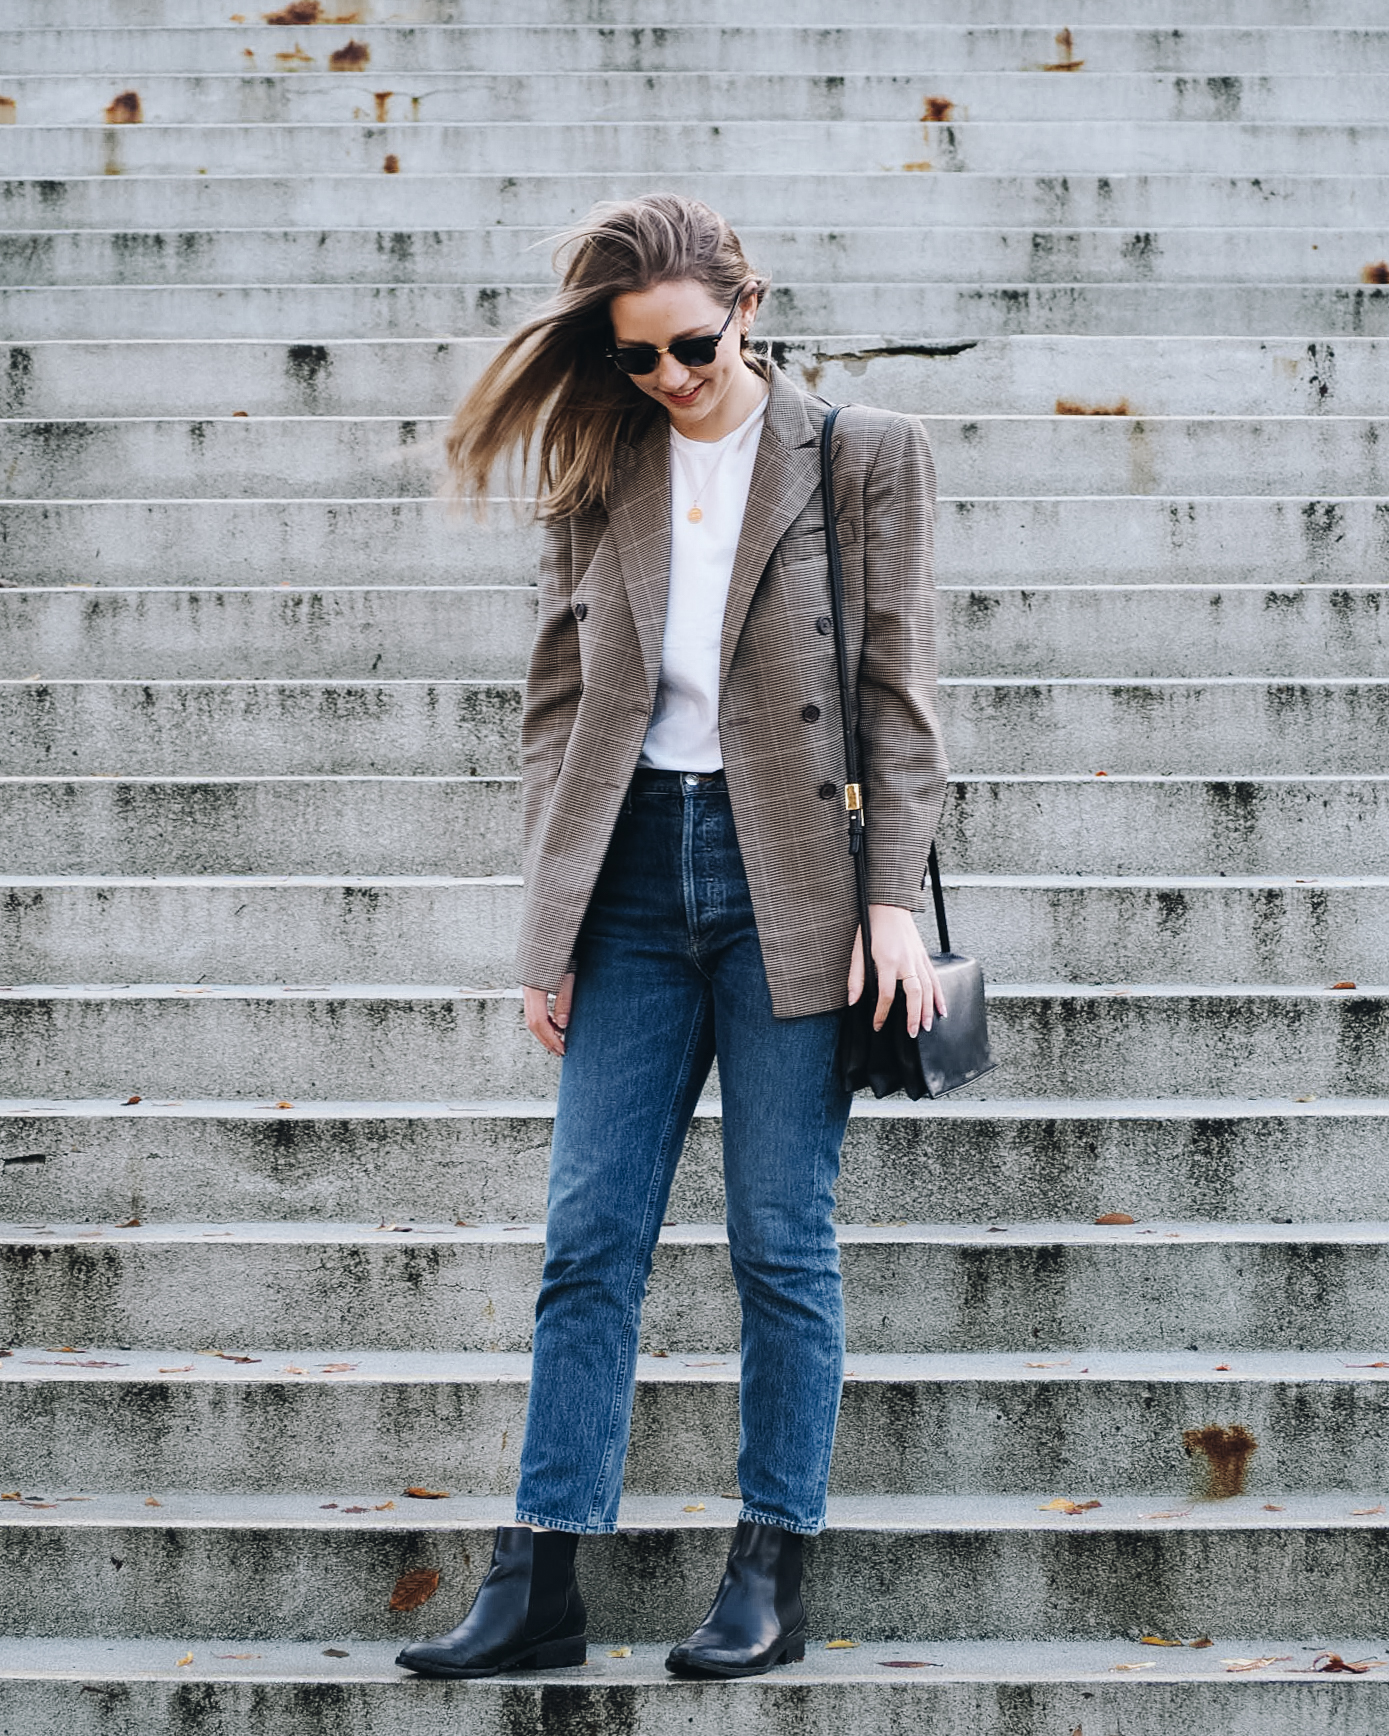 Fall Outfit Inspiration - Saying Goodbye to Vancouver